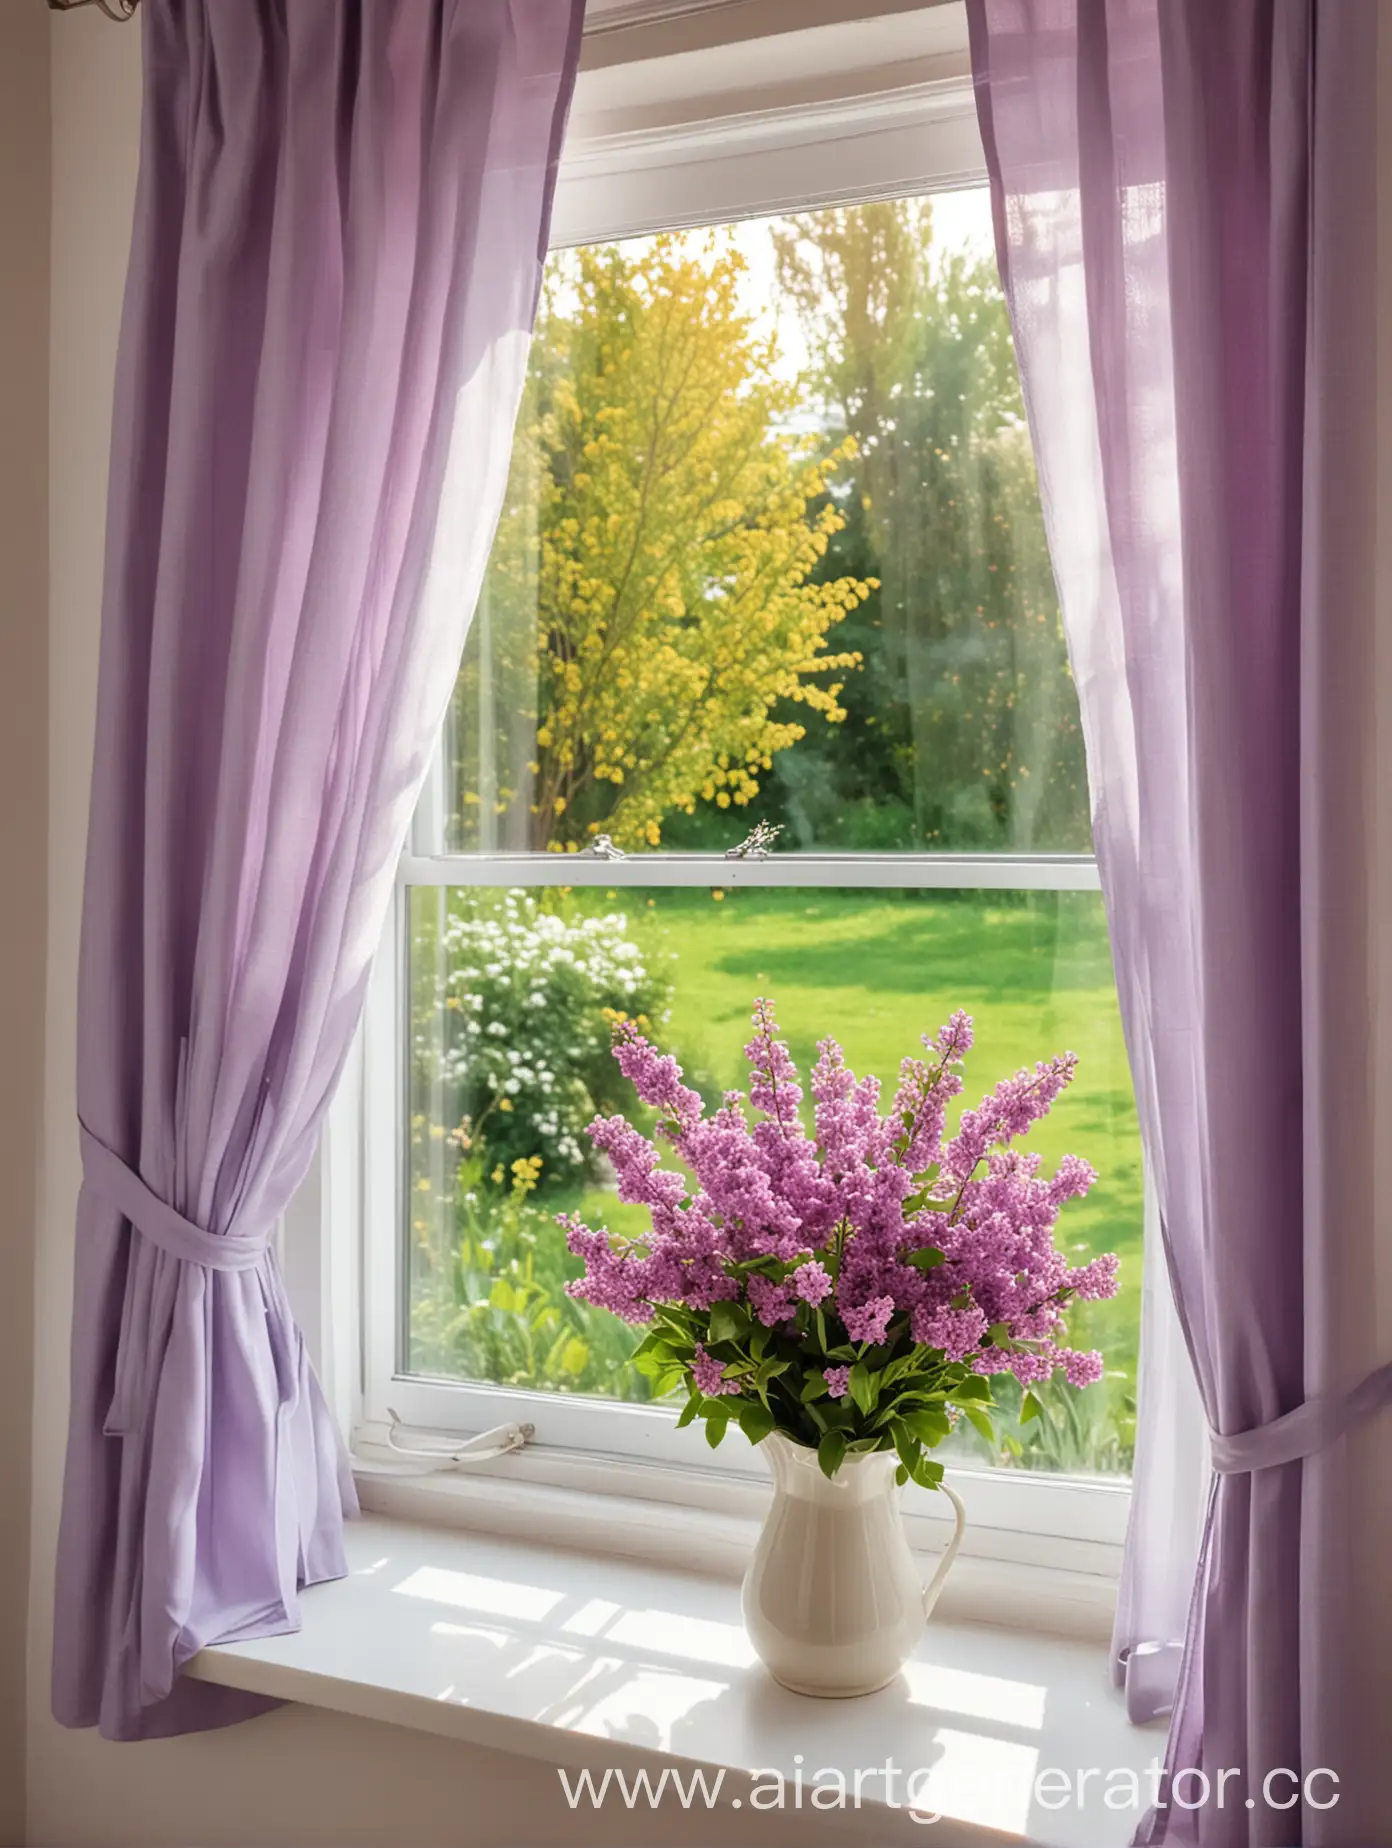 Cozy-Sunrise-Garden-View-with-Lilac-and-Cherry-Tree-Bouquet